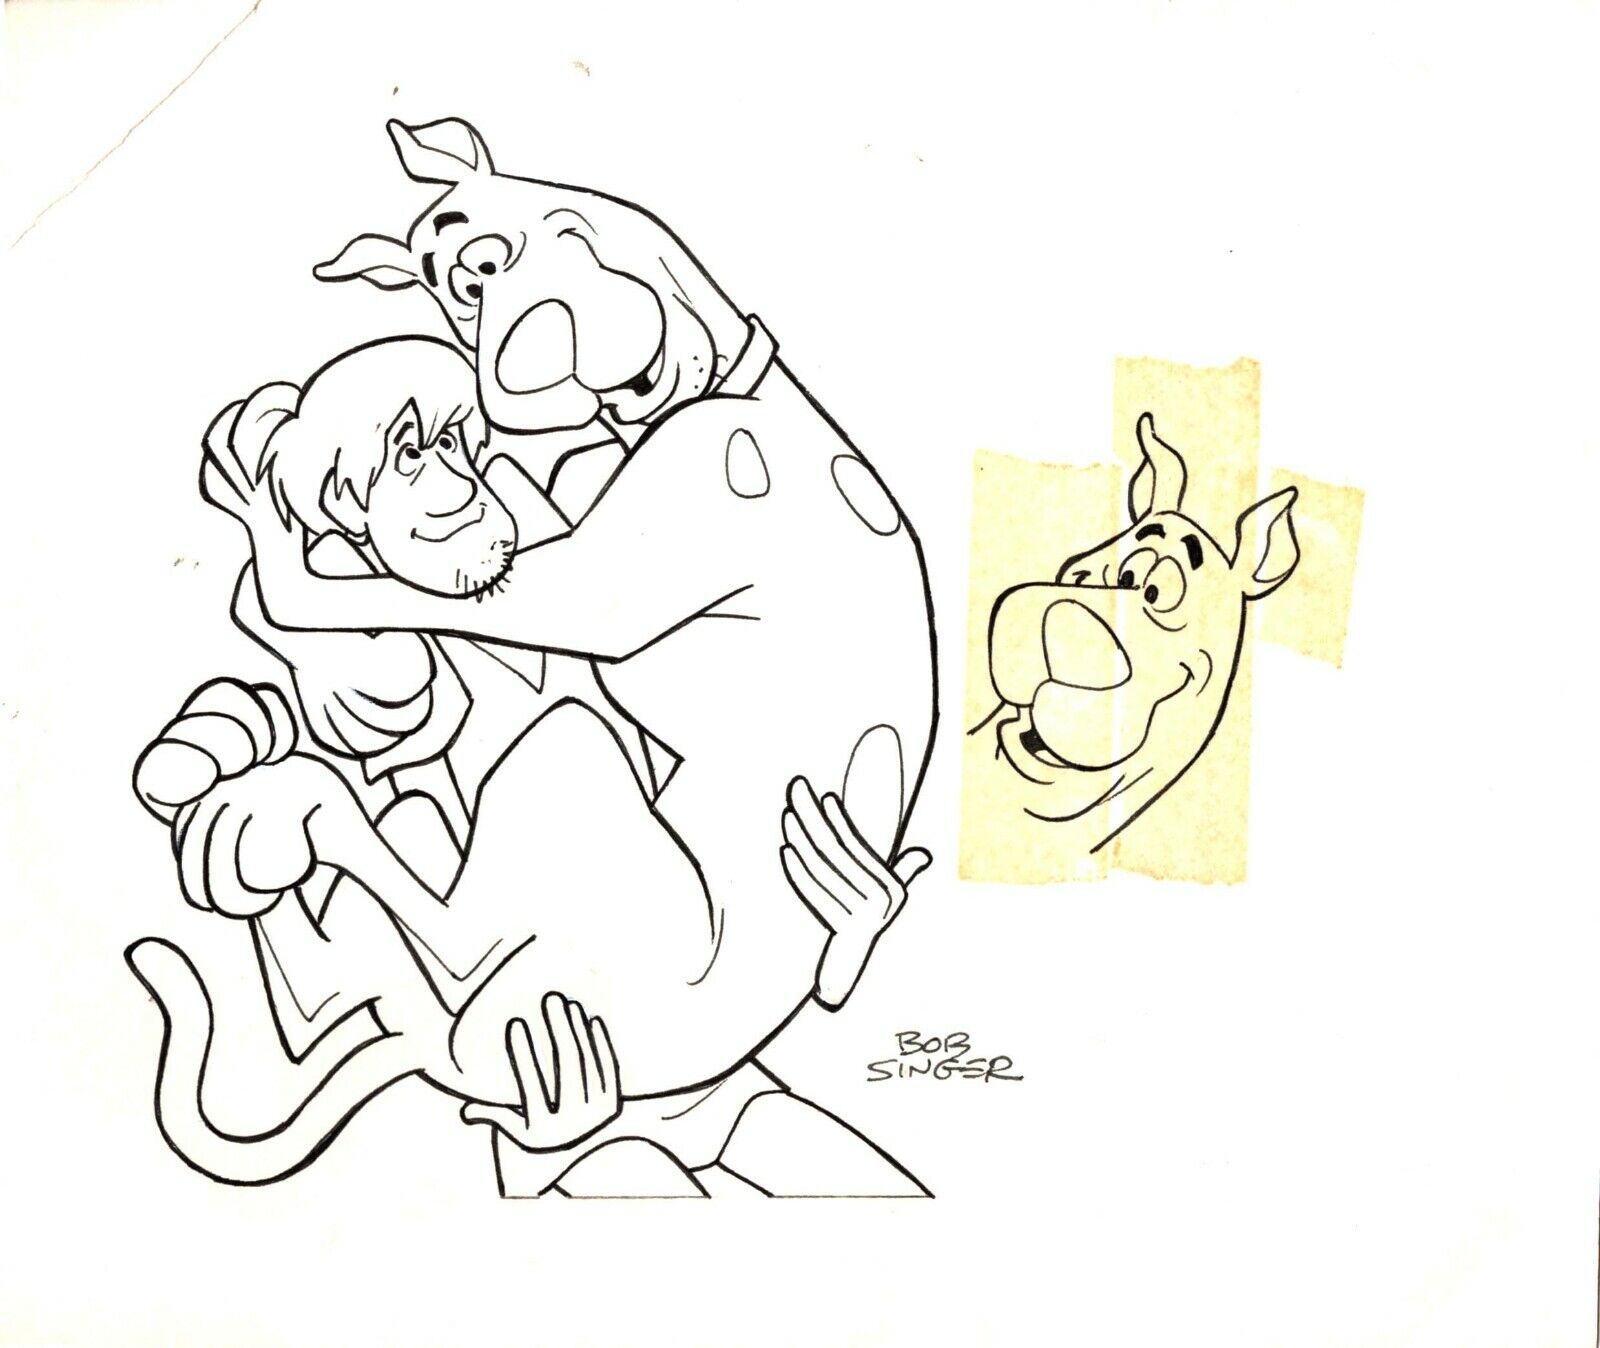 SCOOBY DOO Pen and Ink WBSS Product drawing Hanna Barbera Signed Bob Singer